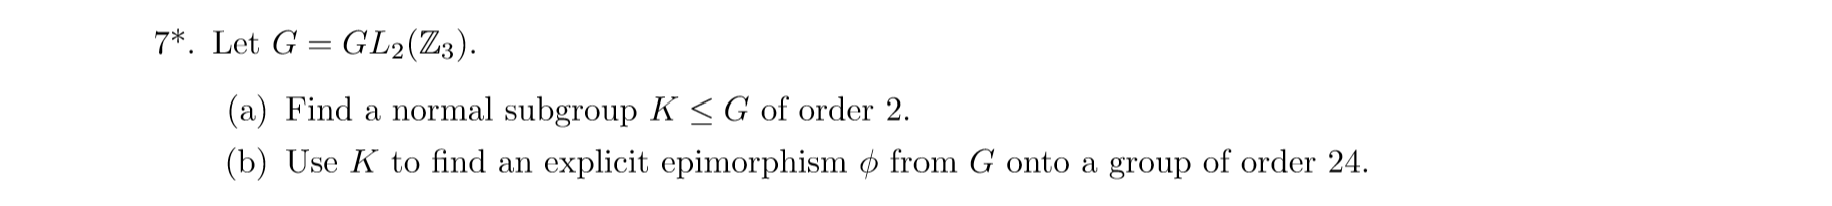 7 Let G GL2(Z3).
(a) Find a normal subgroup K <G of order 2.
(b) Use K to find an explicit epimorphism ø from G onto a group of order 24
